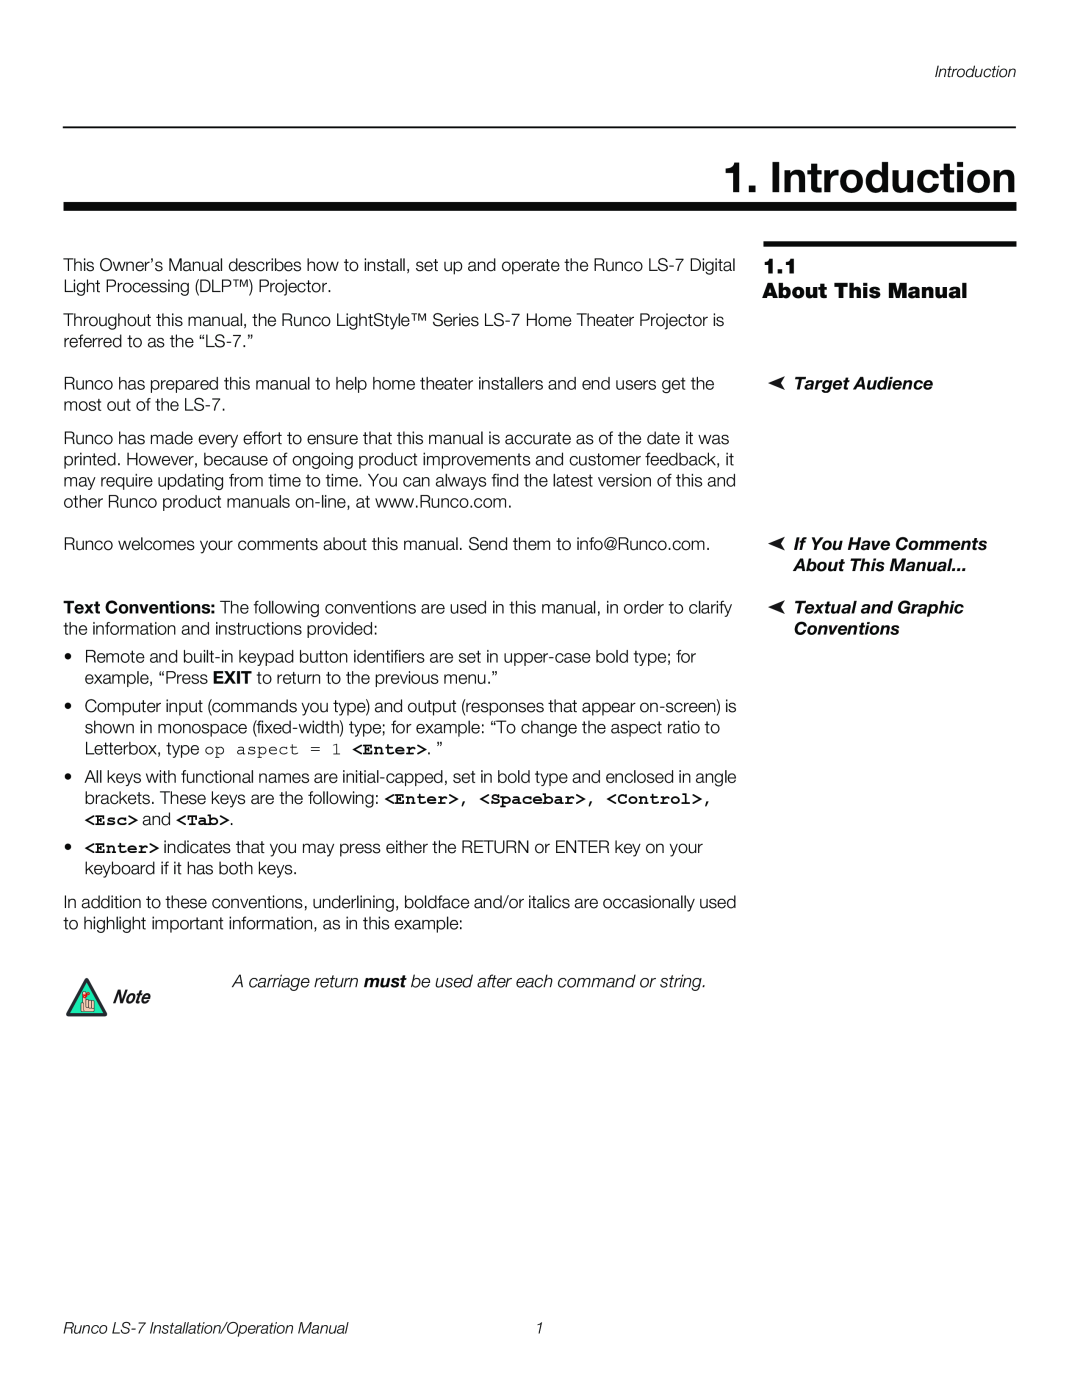 Runco LS-7 Introduction, About This Manual, Target Audience, If You Have Comments, Textual and Graphic, Conventions 